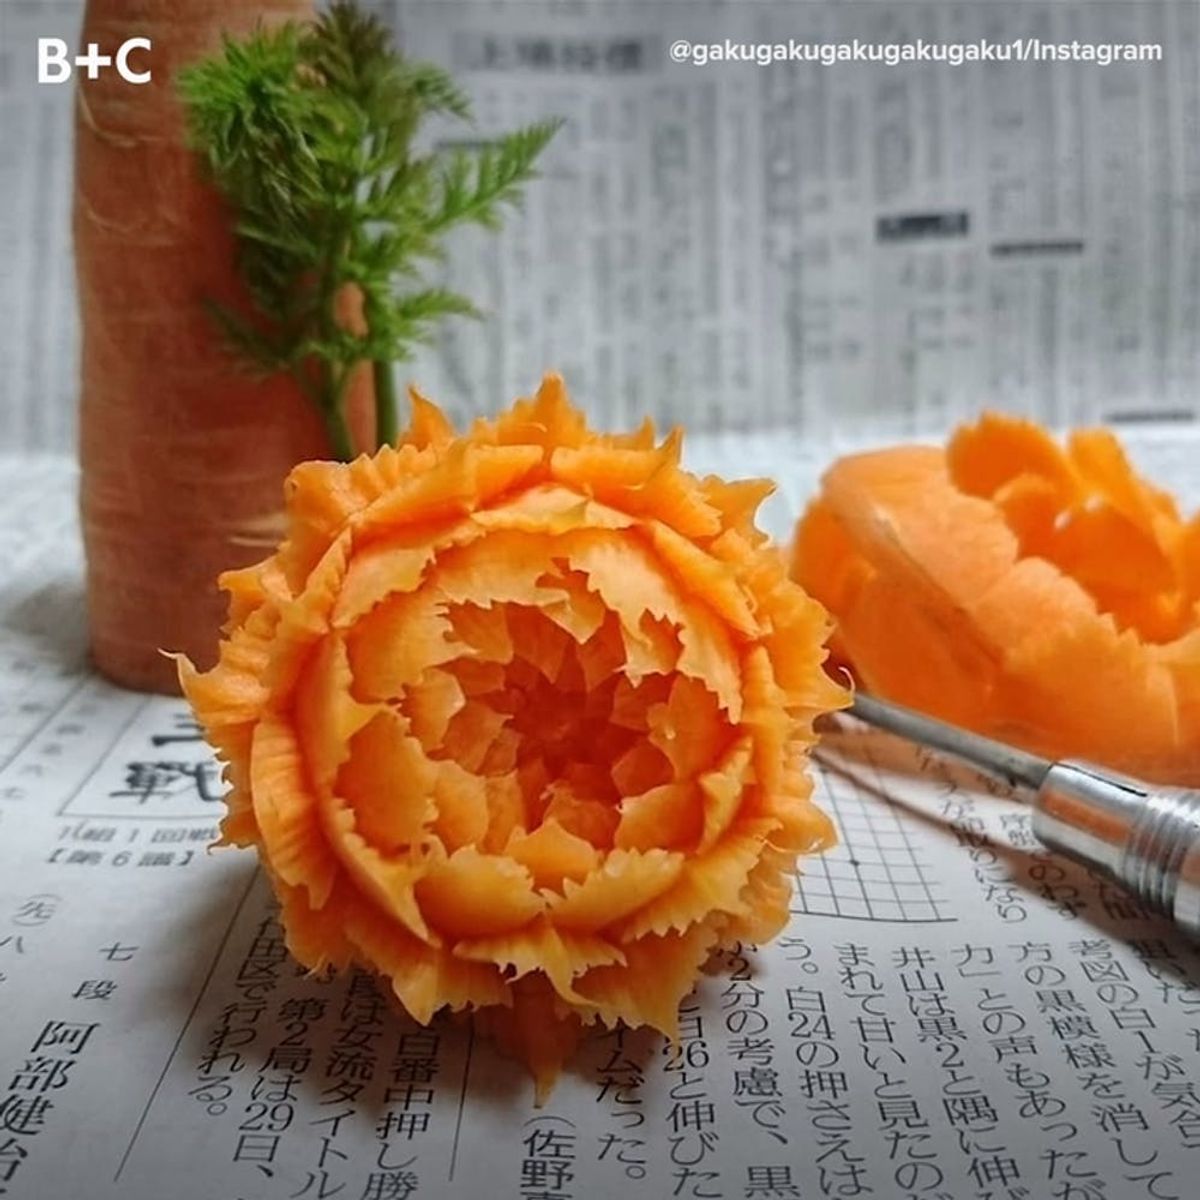 This Artist Turns Produce Into Amazing Edible Art